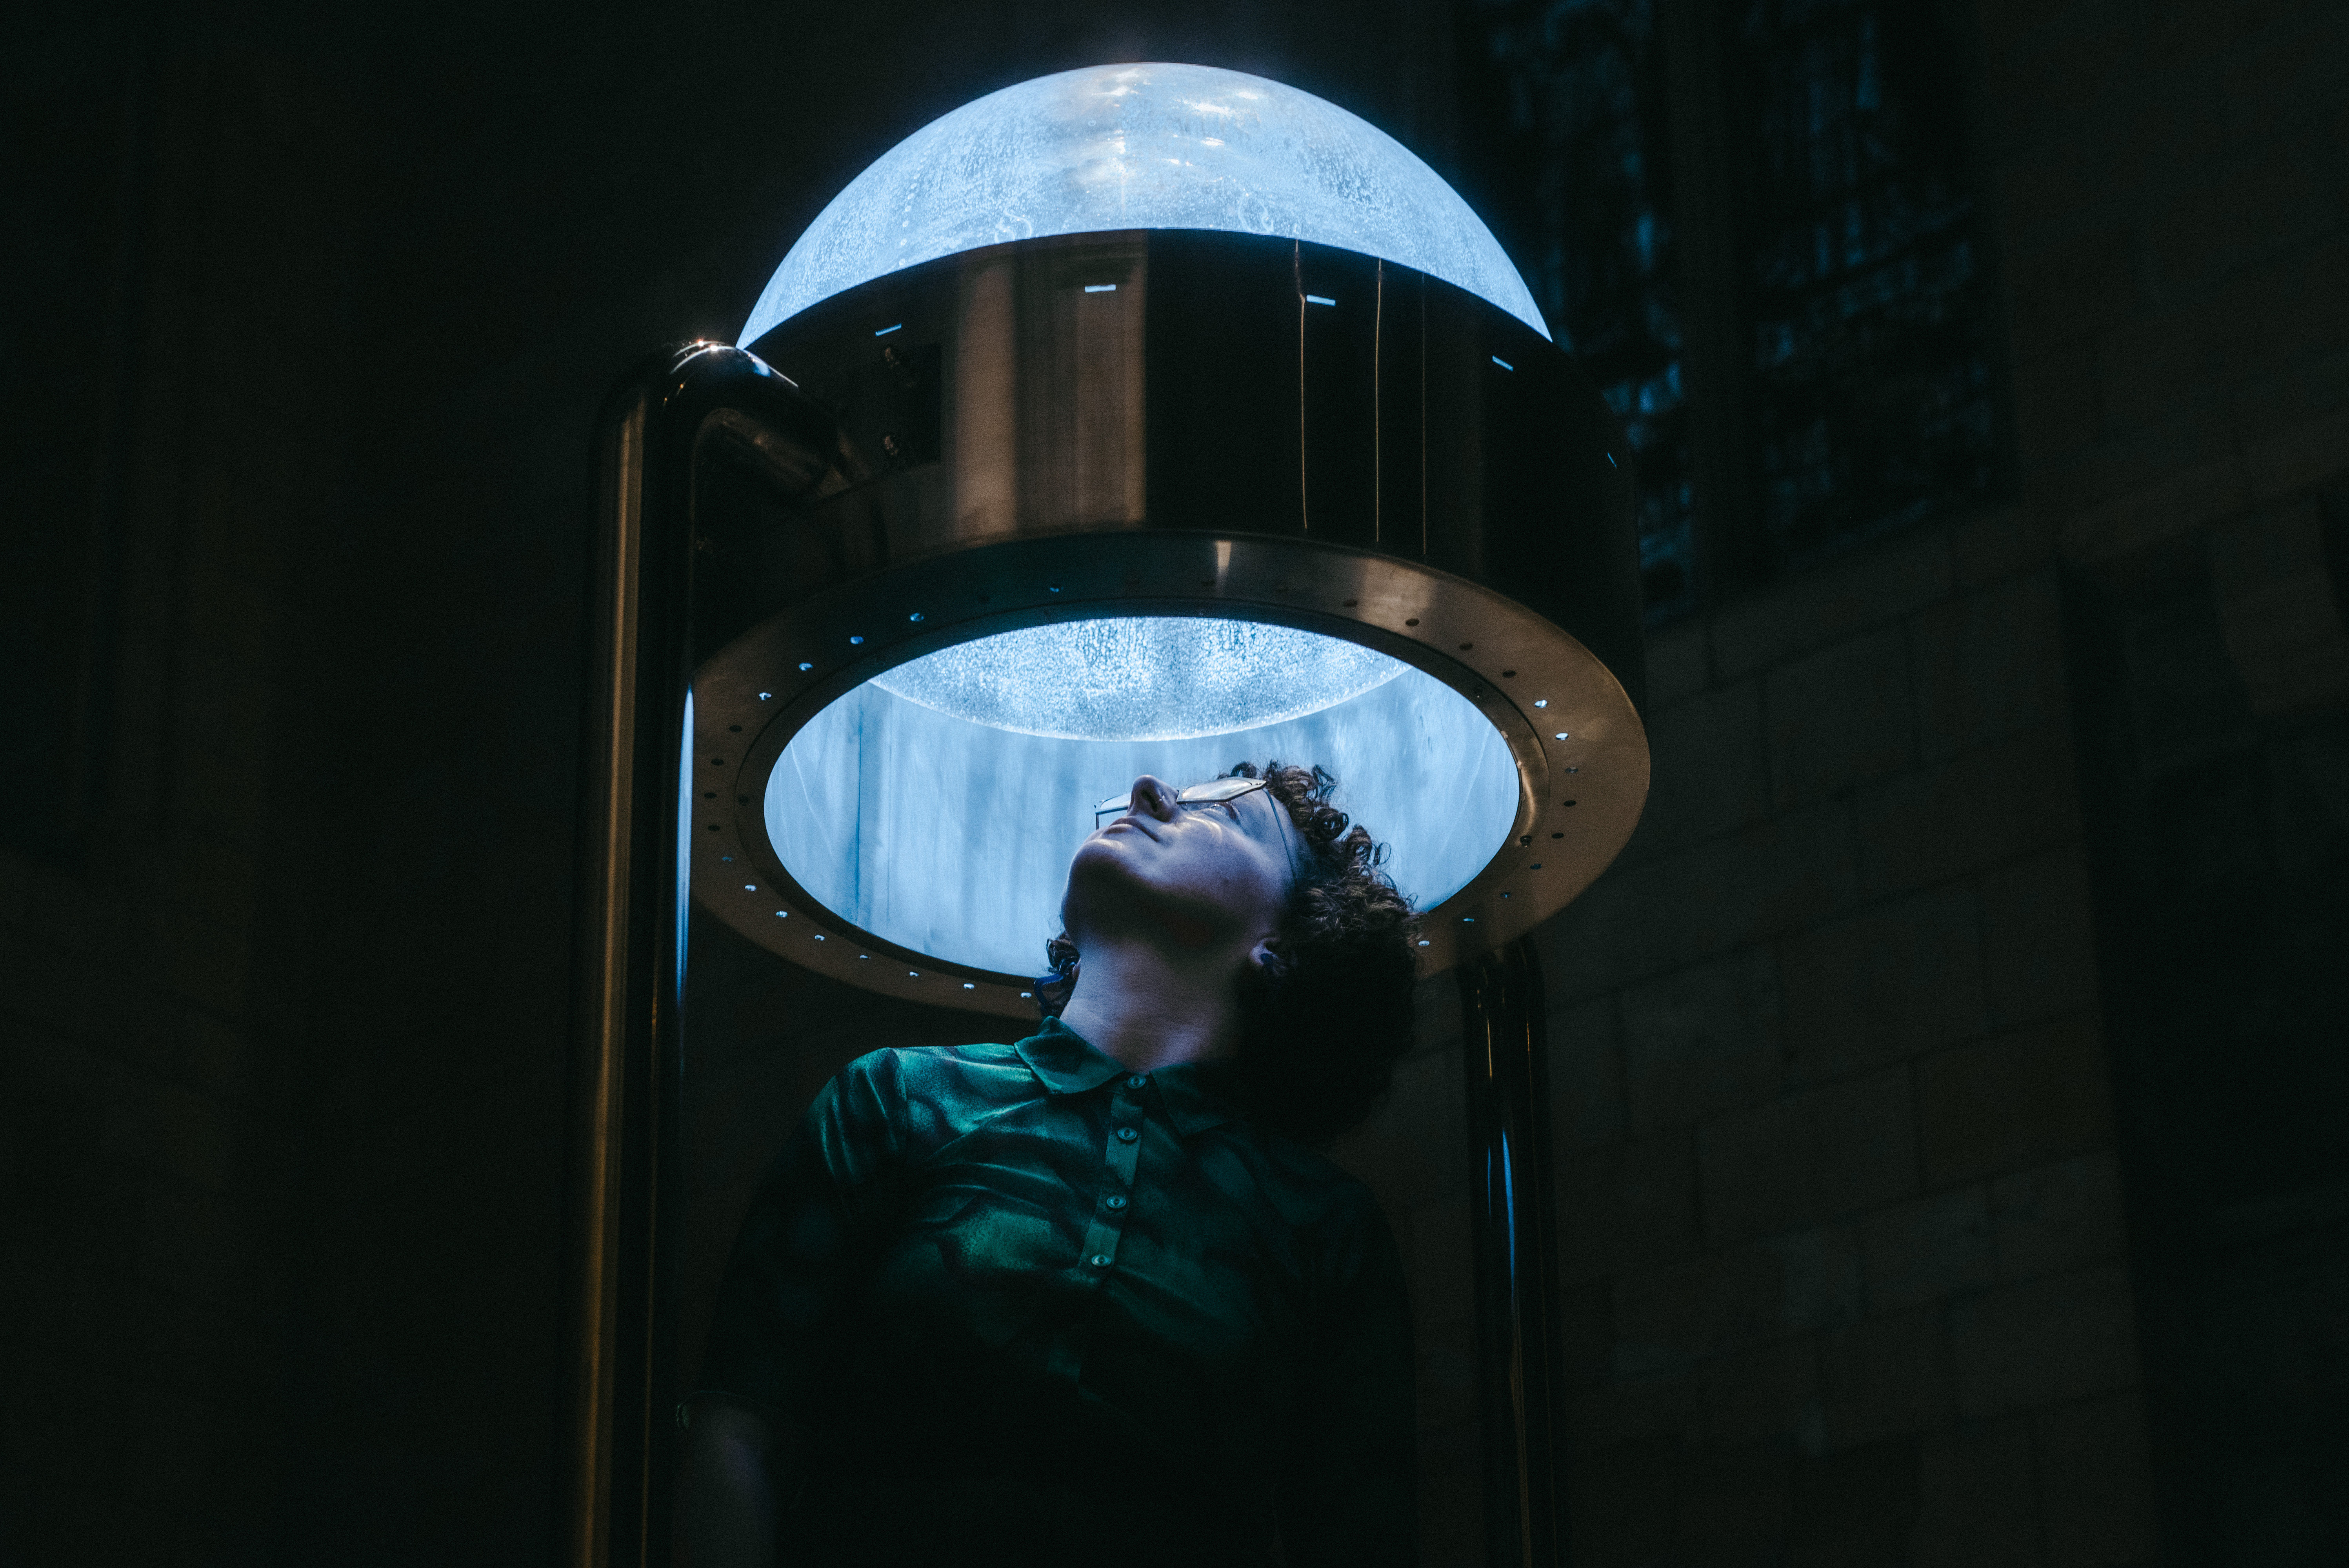 a person looking up into a bubble-like structure